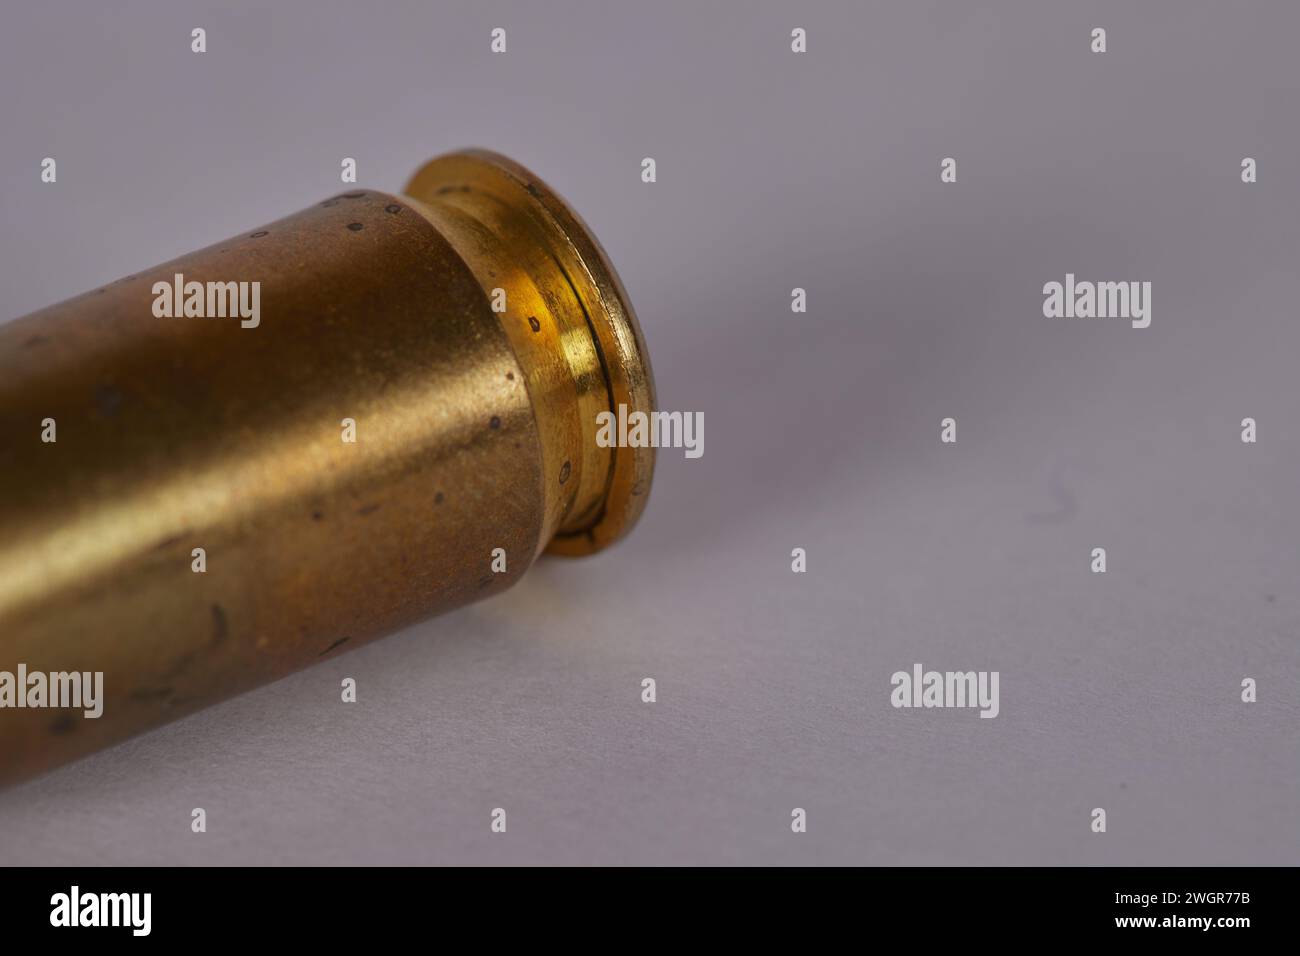 The American .45 semi-auto pistol cartridge. Developed in 1904 by John Moses Browning and used in the 1911 semi-auto pistol!! Stock Photo